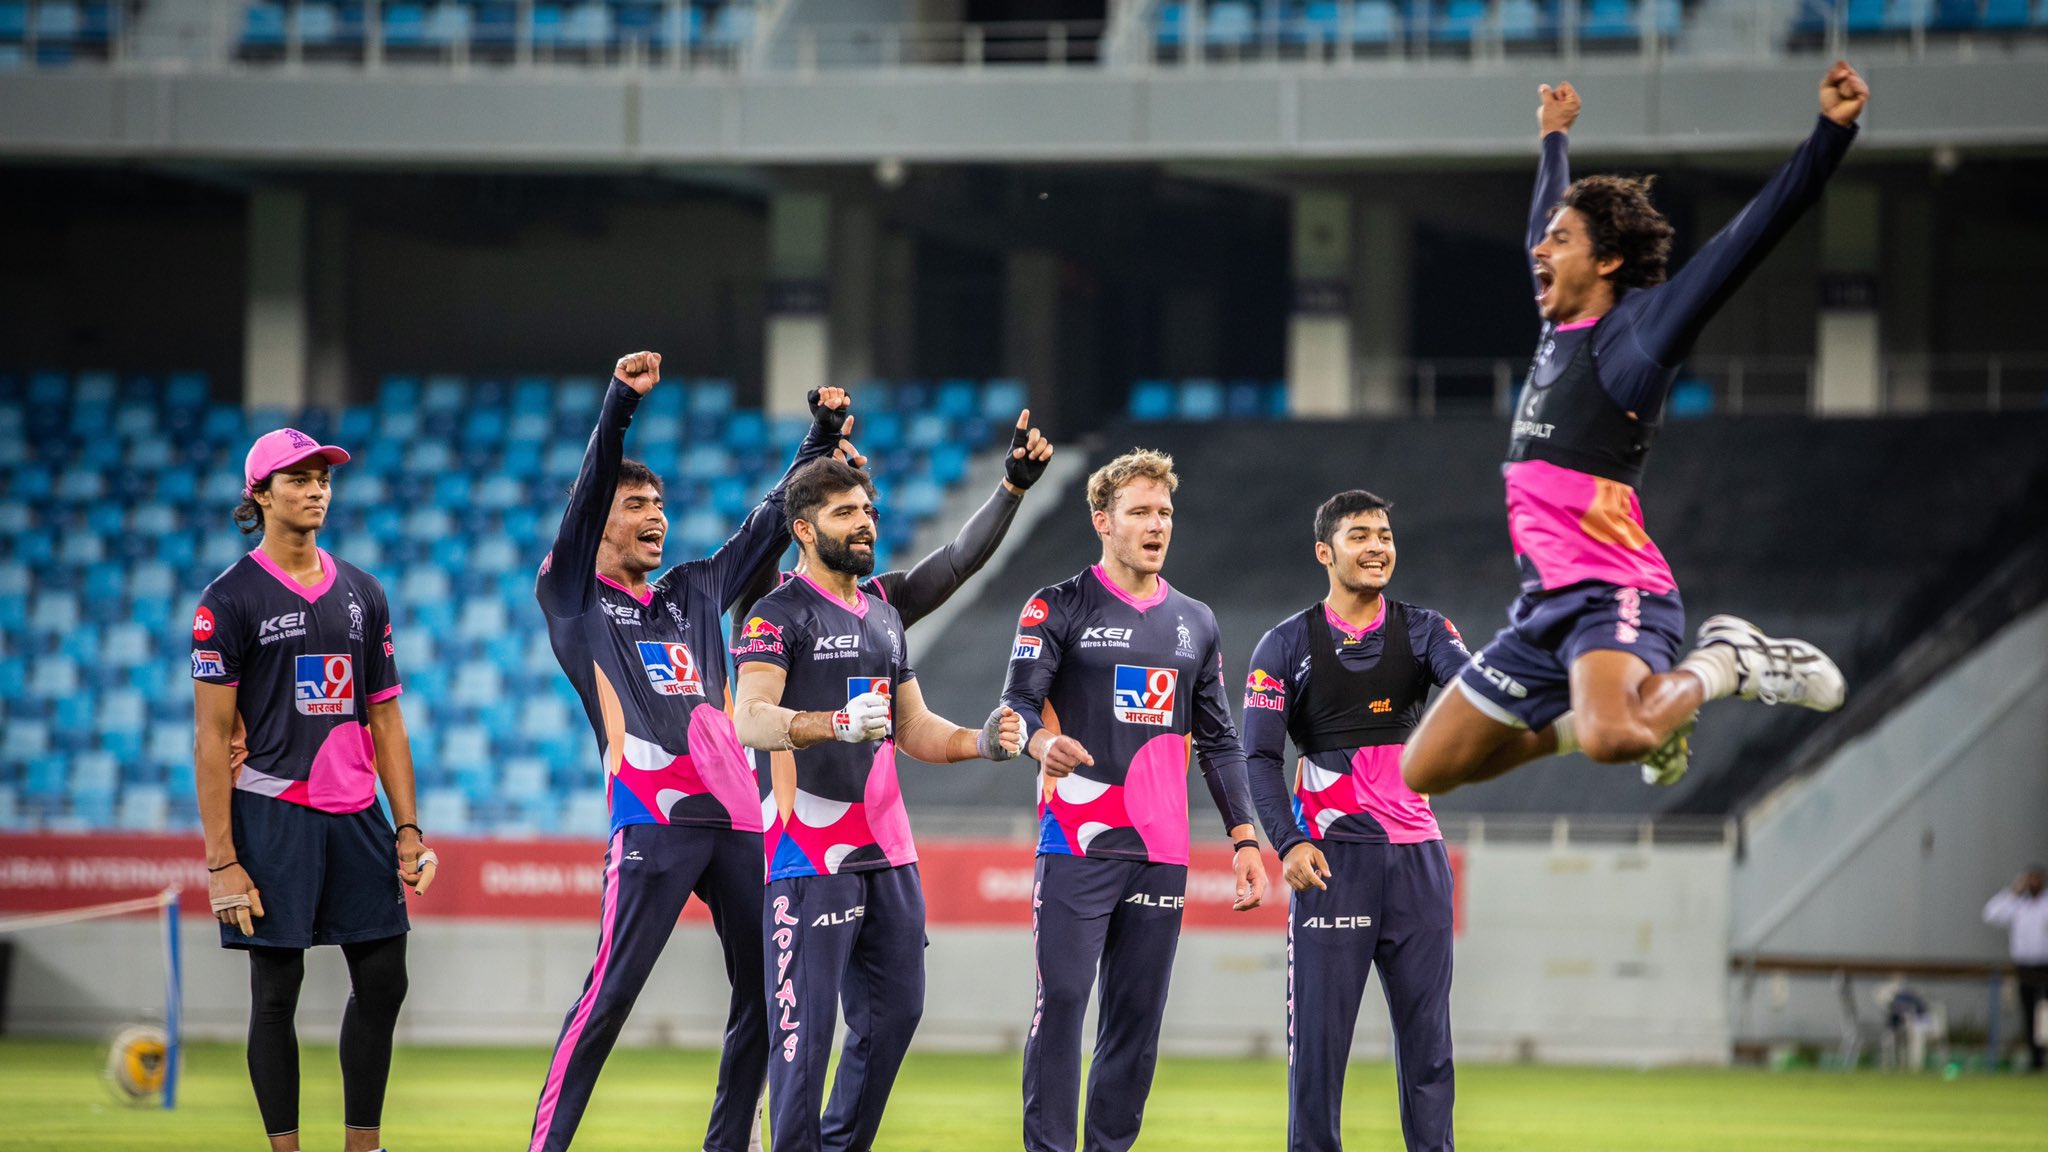 Rajasthan Royals players are gearing up well for IPL 2020 | RR Twitter